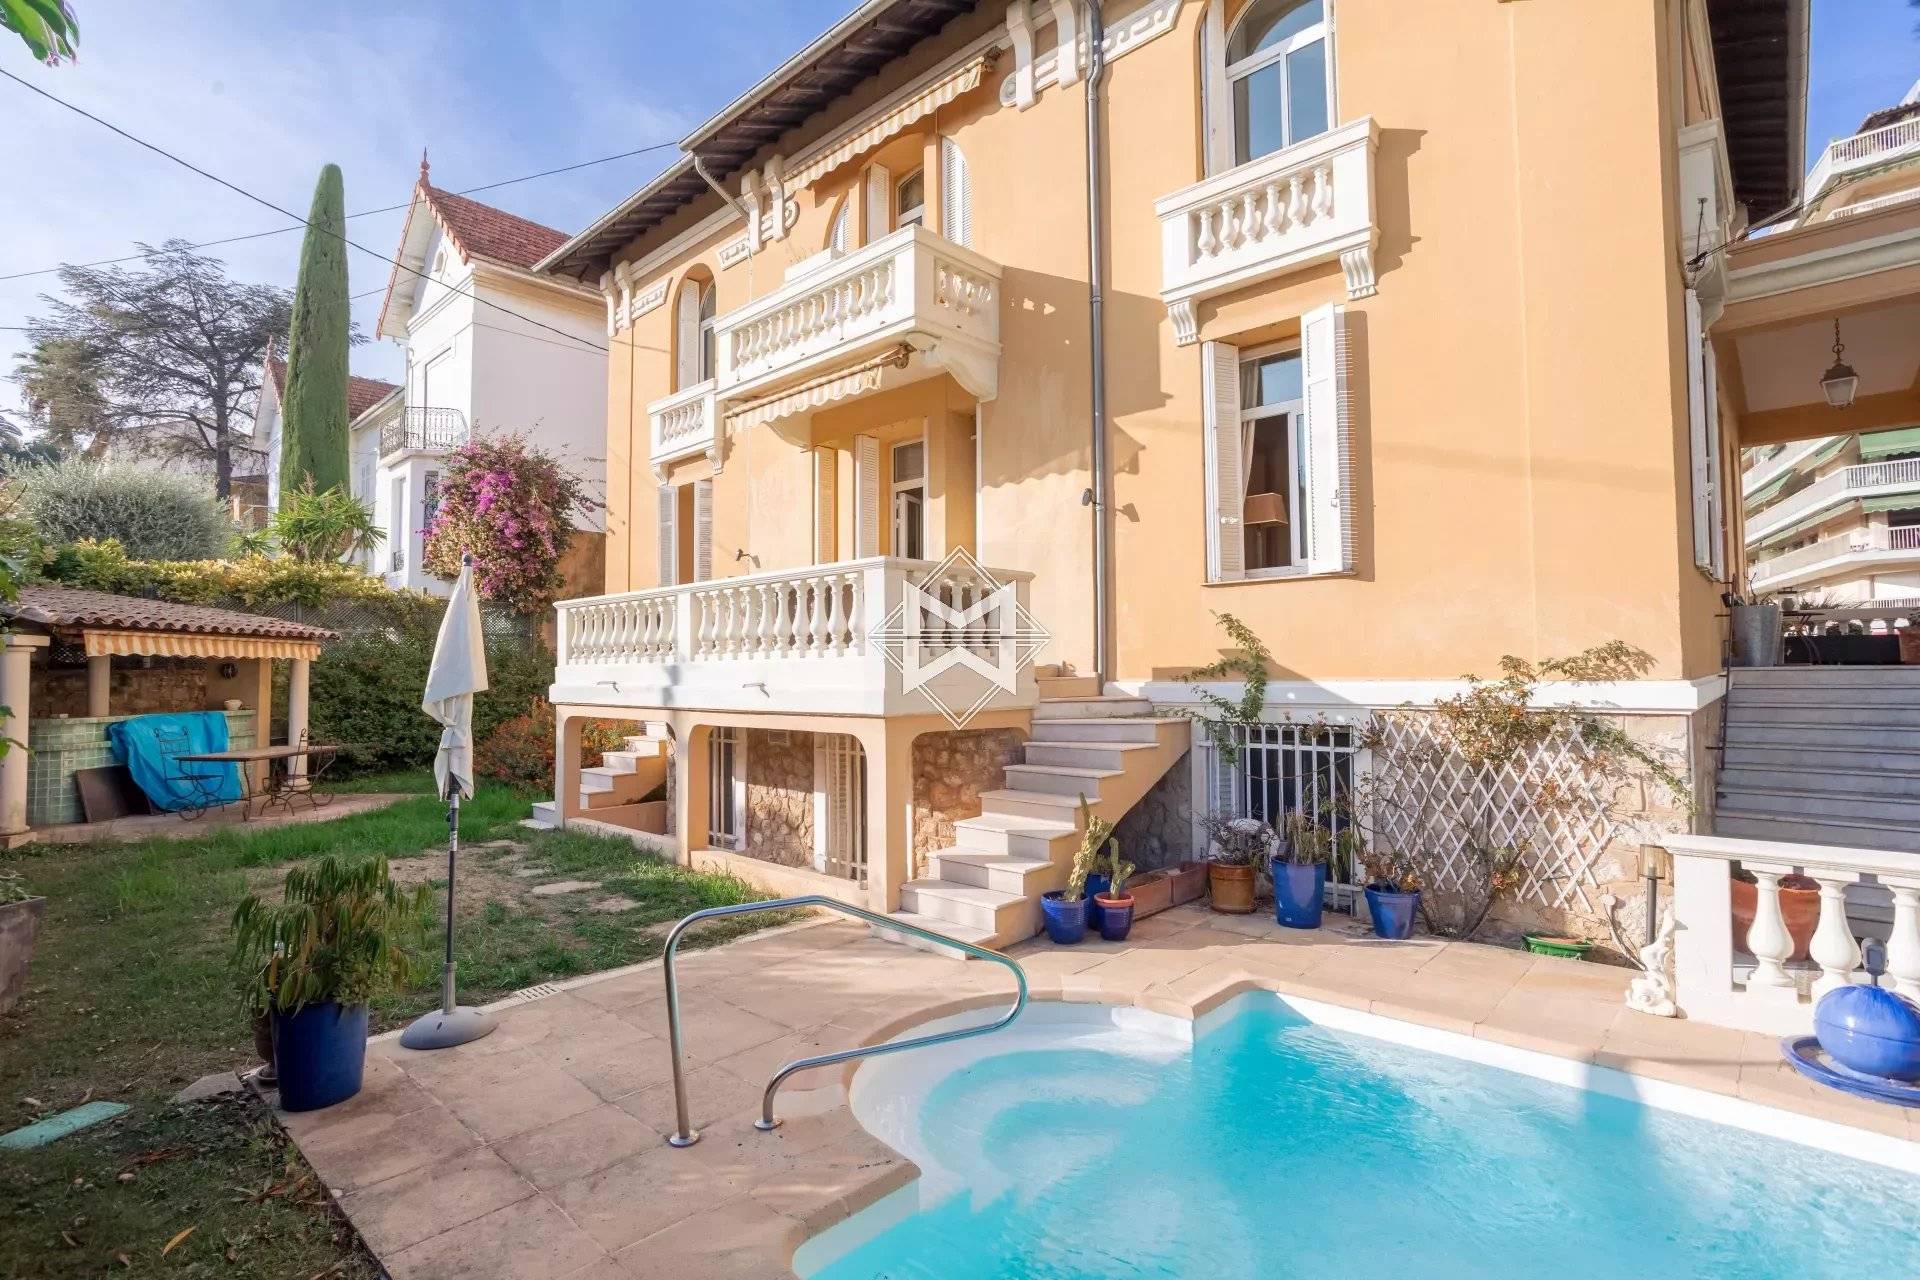 Exceptional townhouse in Cannes with garden and swimming pool - Charm and impressive volumes